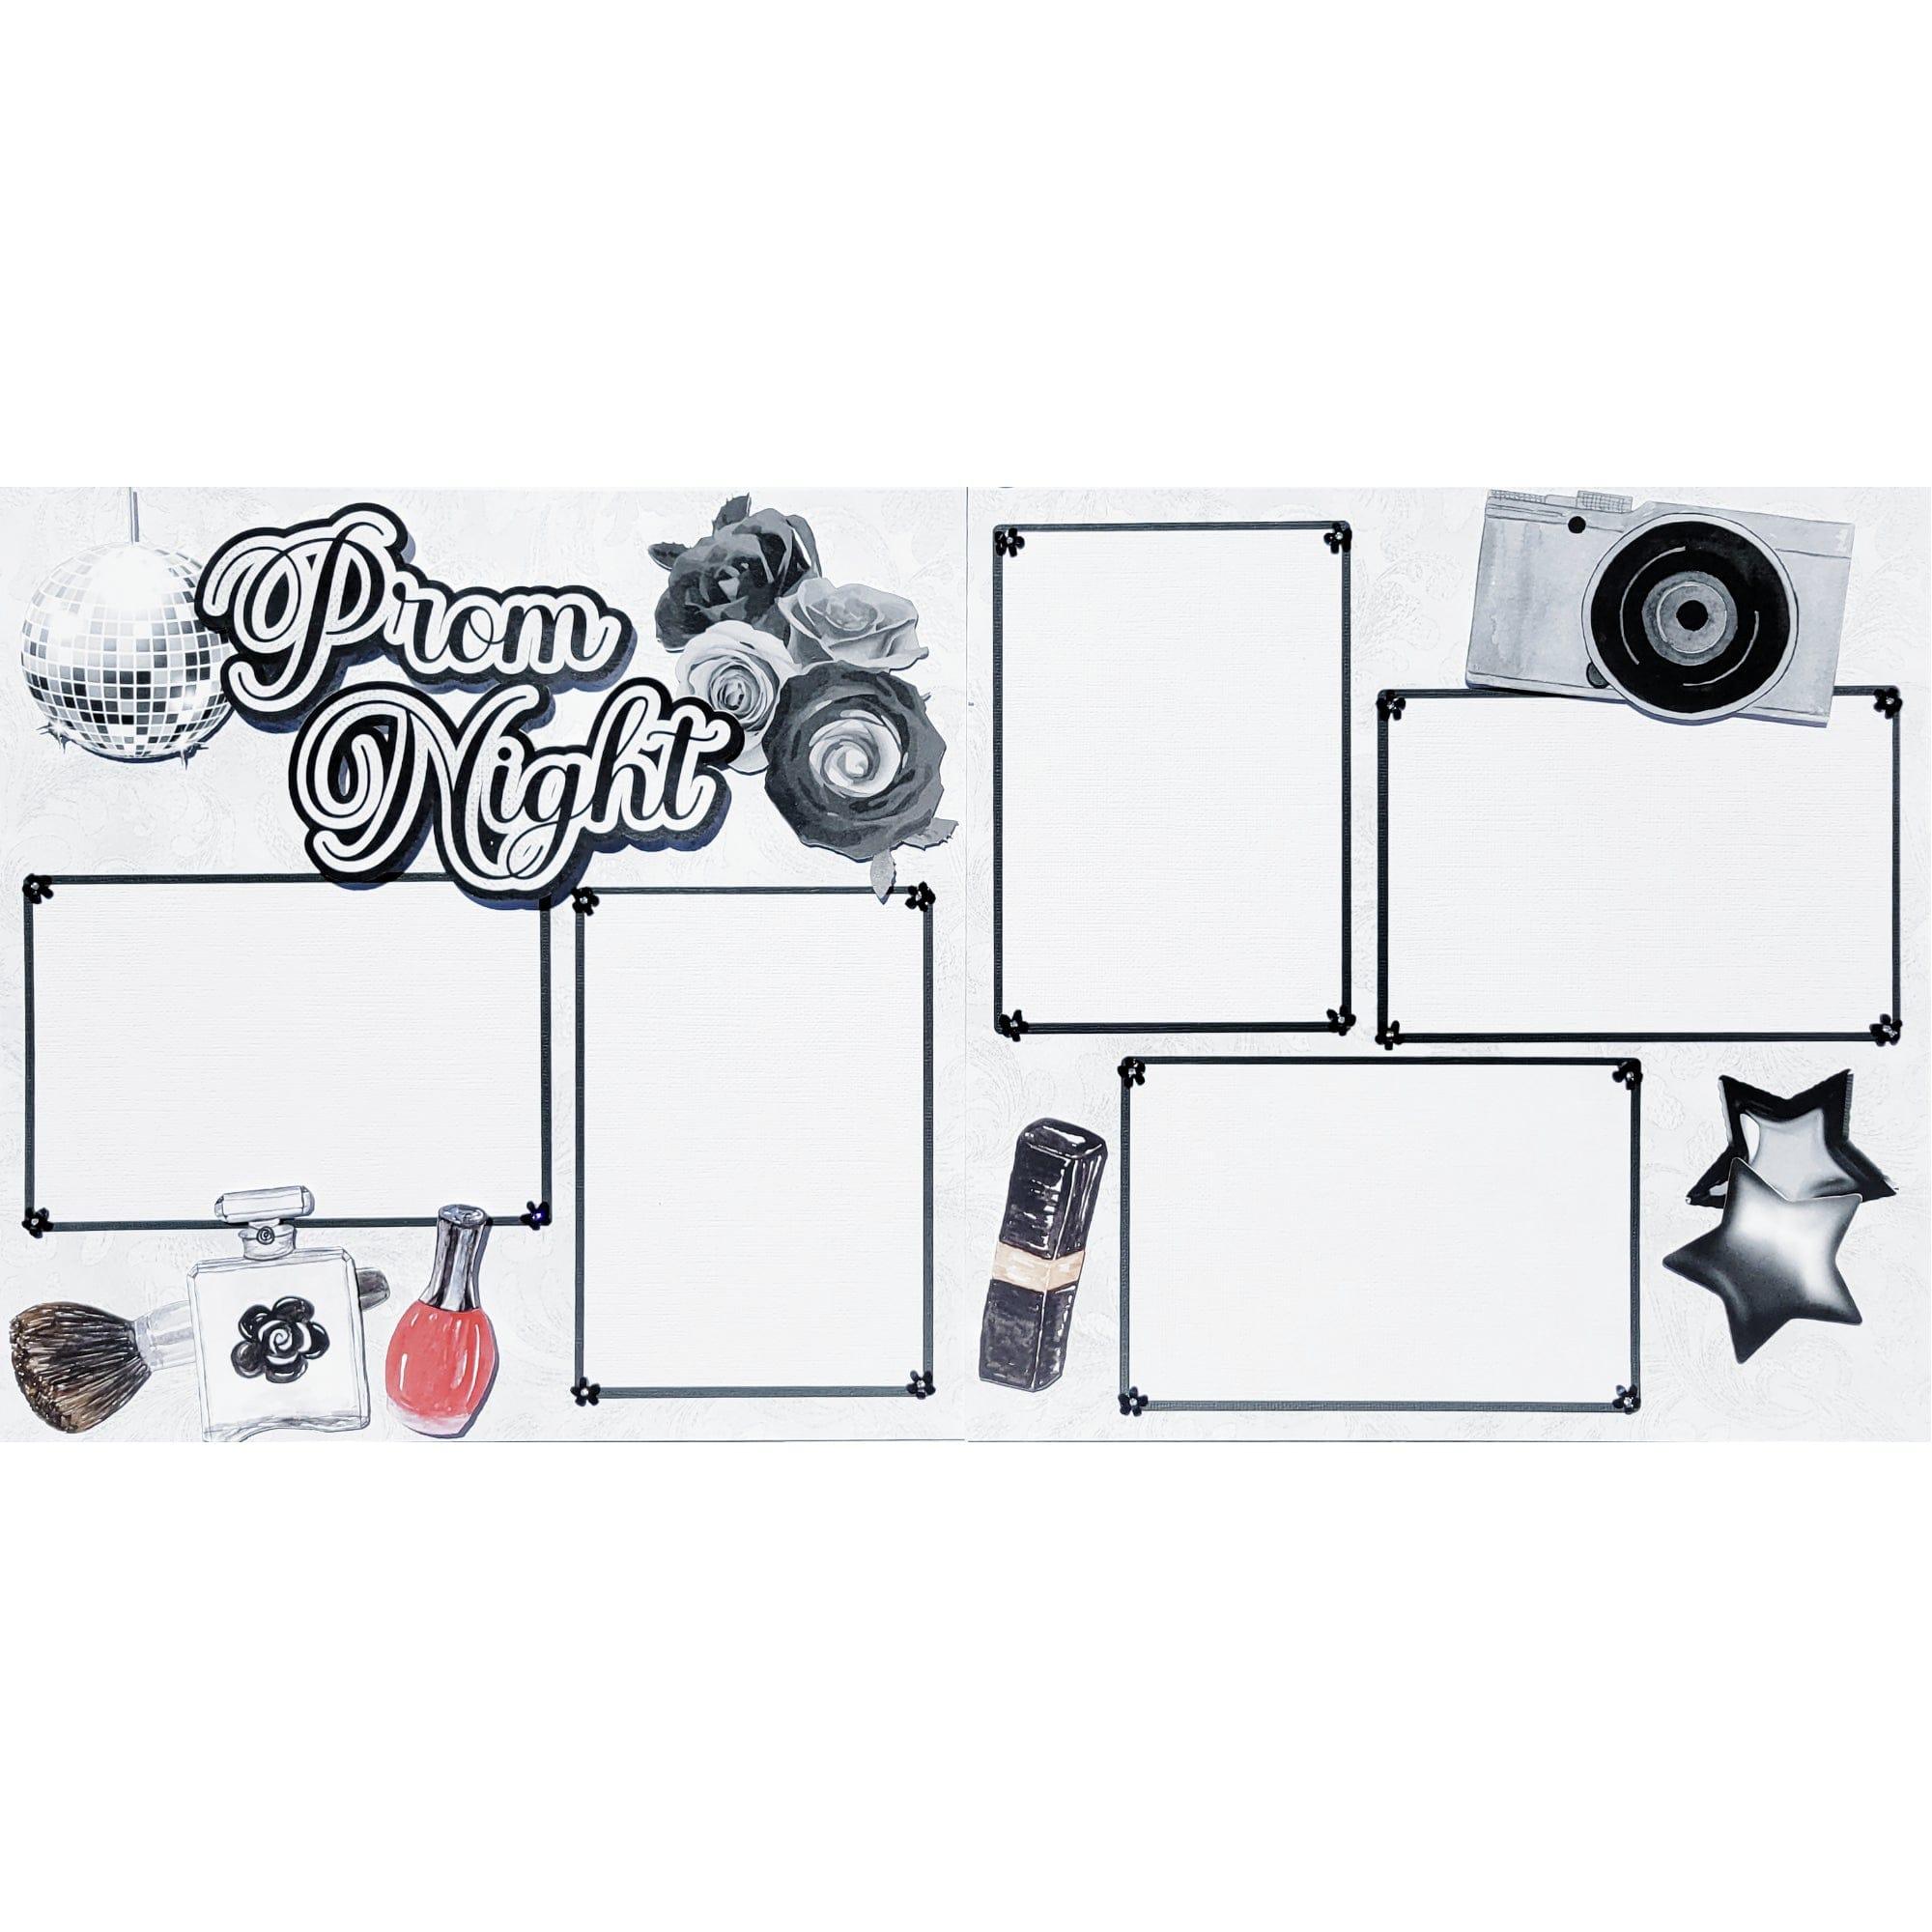 Prom Night (2) - 12 x 12 Pages, Fully-Assembled & Hand-Crafted 3D Scrapbook Premade by SSC Designs